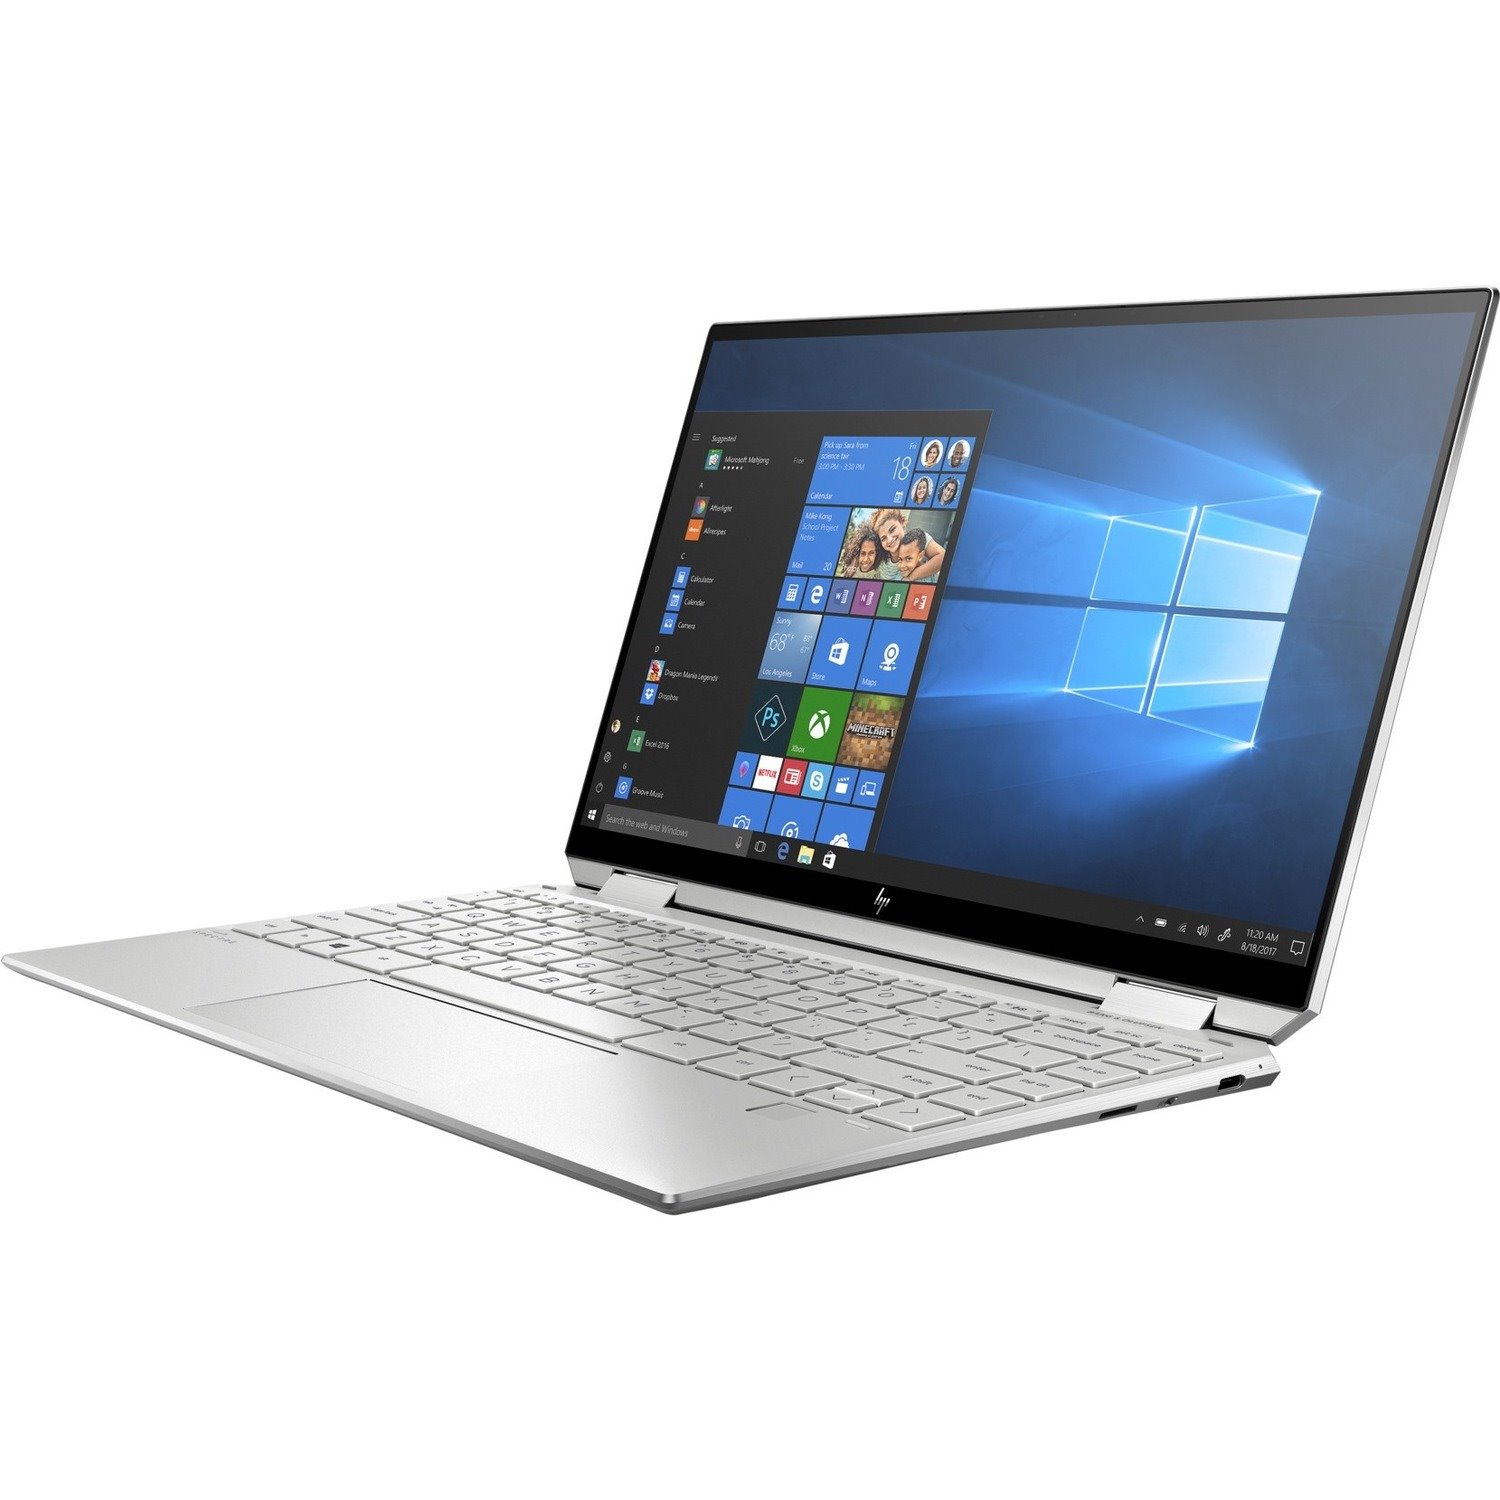 HP Spectre x360 13-aw0000 13-aw0125tu 33.8 cm (13.3") Touchscreen Convertible 2 in 1 Notebook - 1920 x 1080 - Intel Core i7 10th Gen i7-1065G7 Quad-core (4 Core) 1.30 GHz - 16 GB Total RAM - 1 TB SSD - Natural Silver